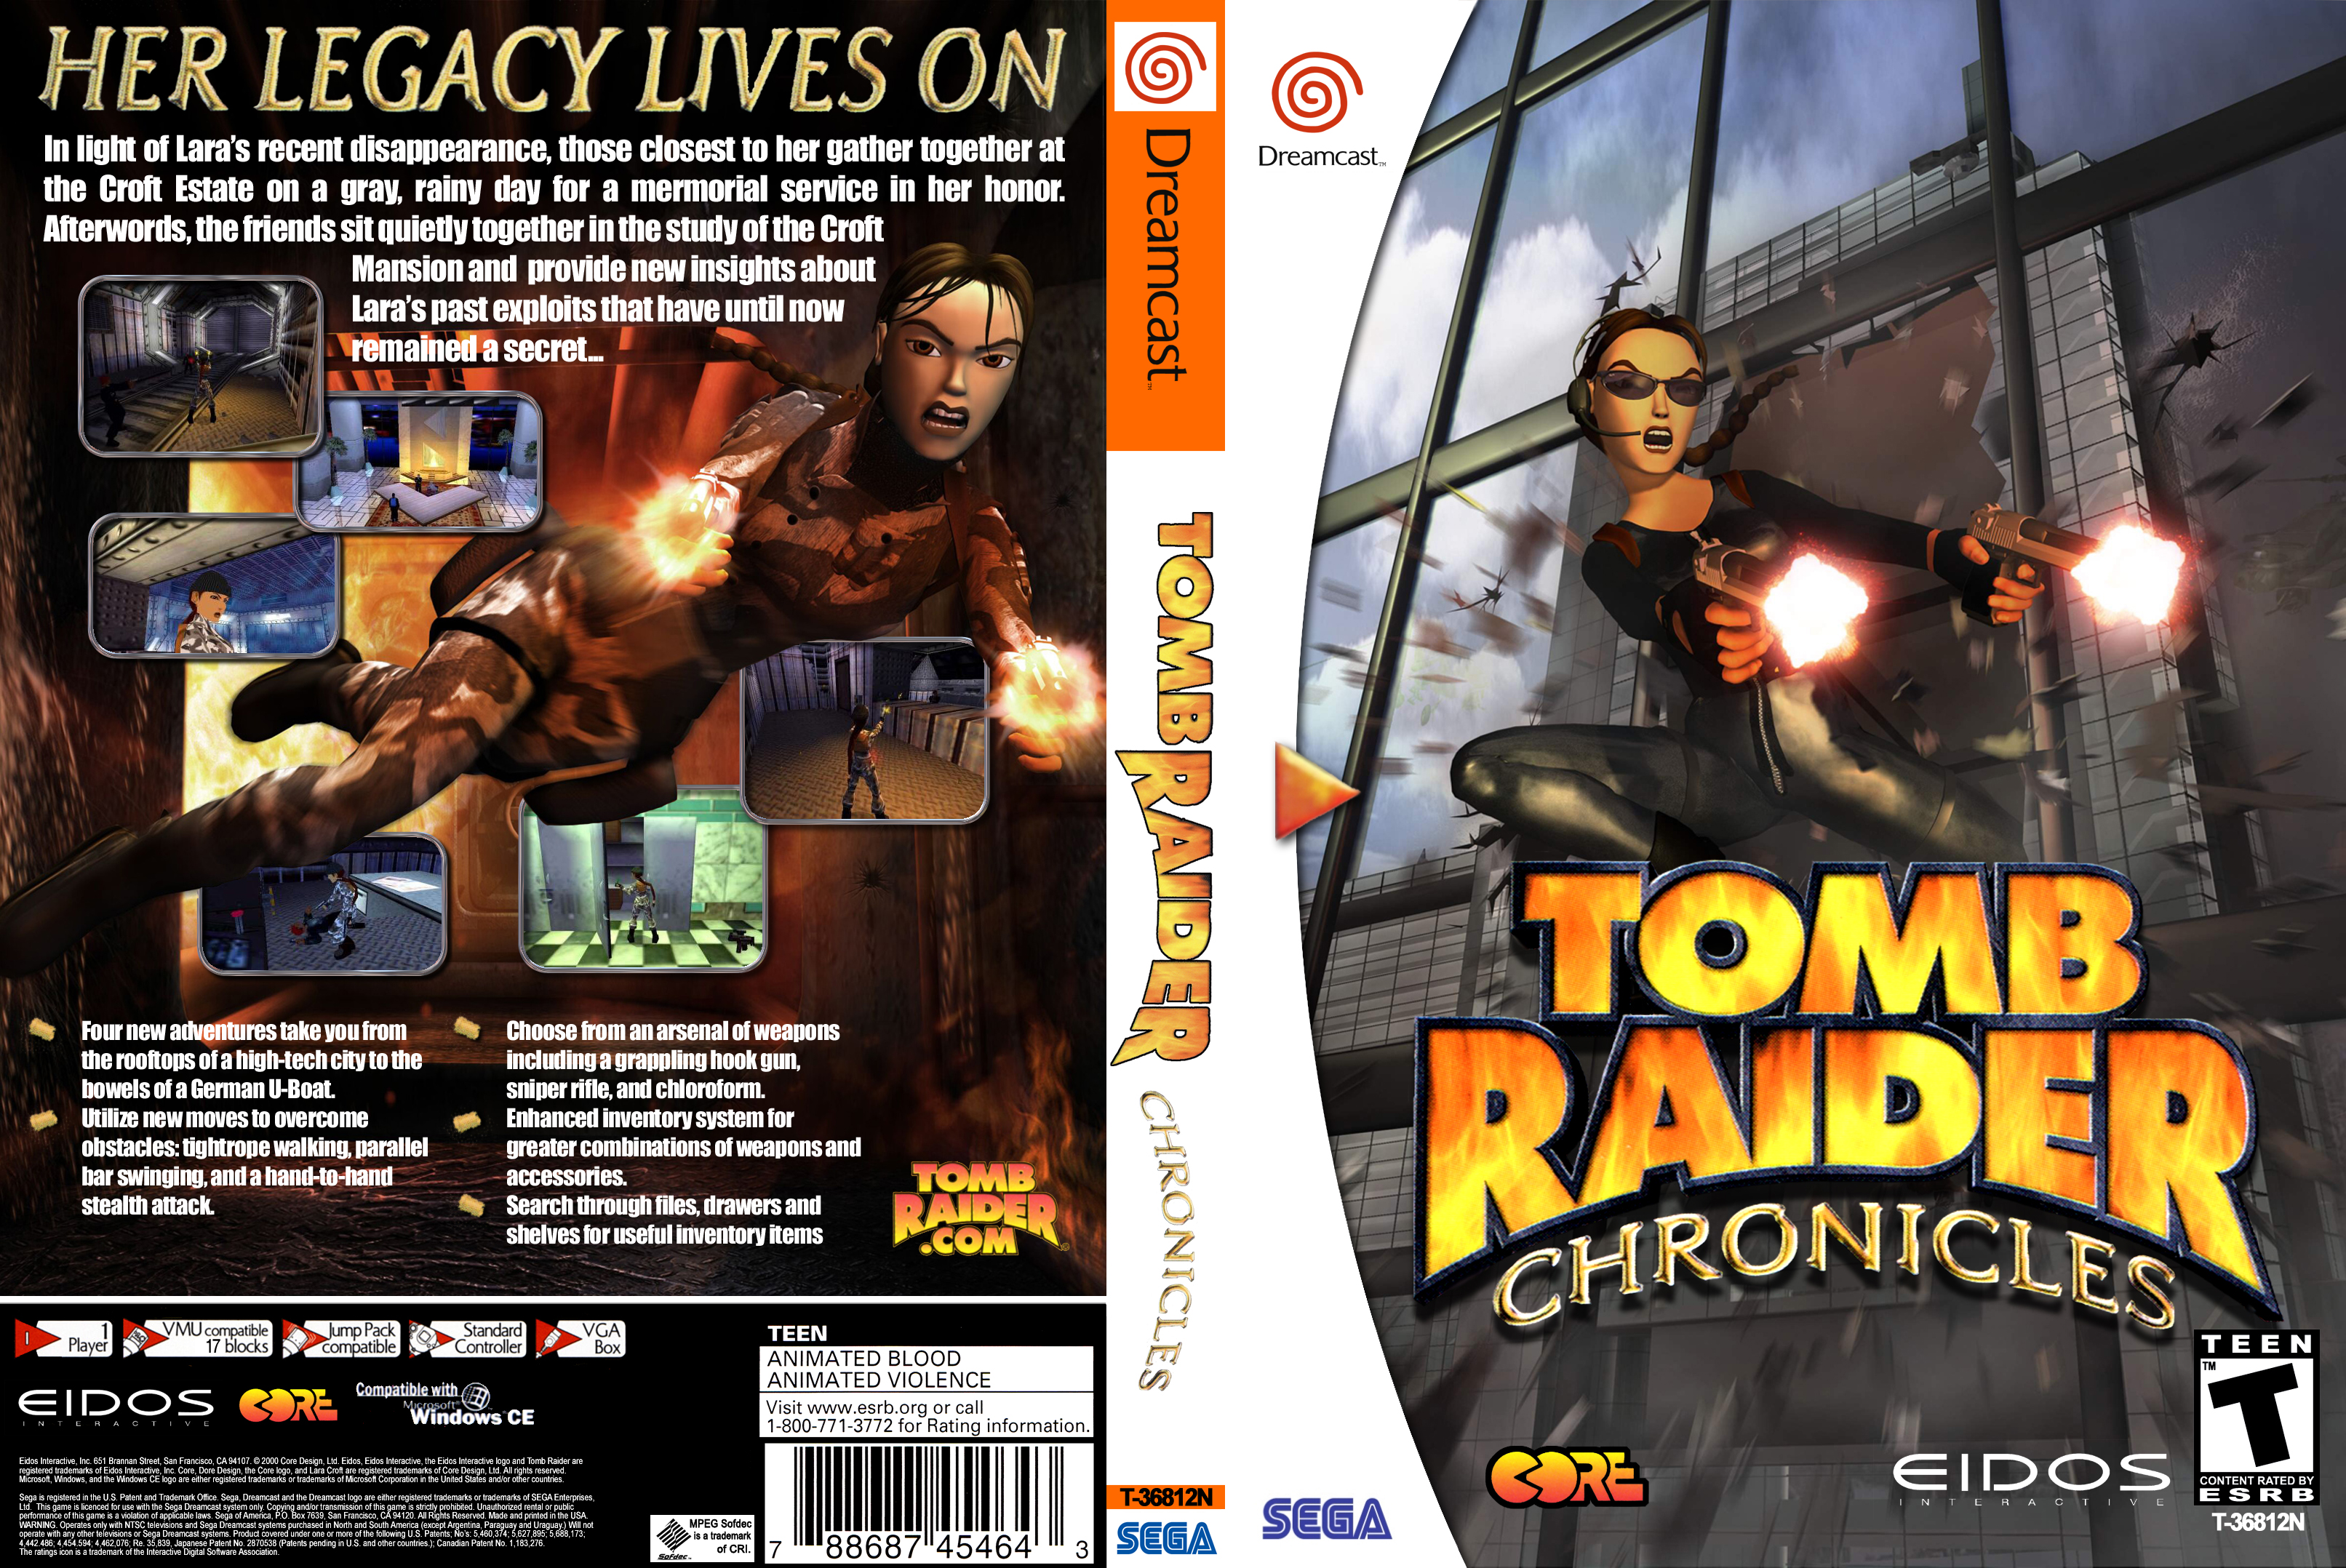 Tombraider Chronicles